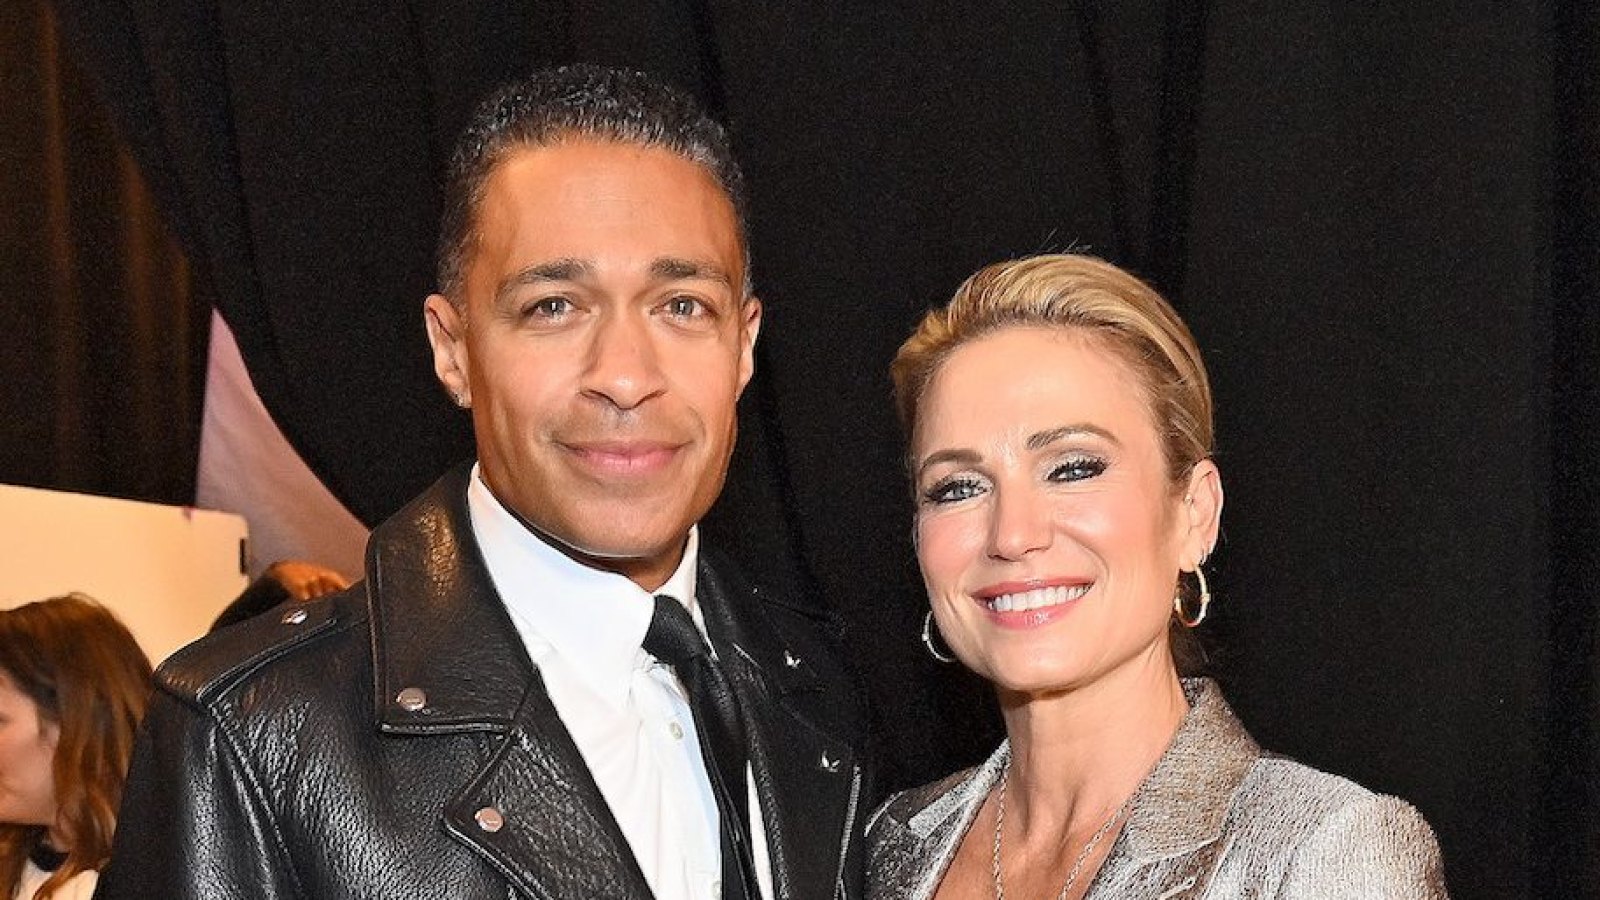 T J Holmes Was Worried About Race Playing Into Public Fight With Amy Robach inline